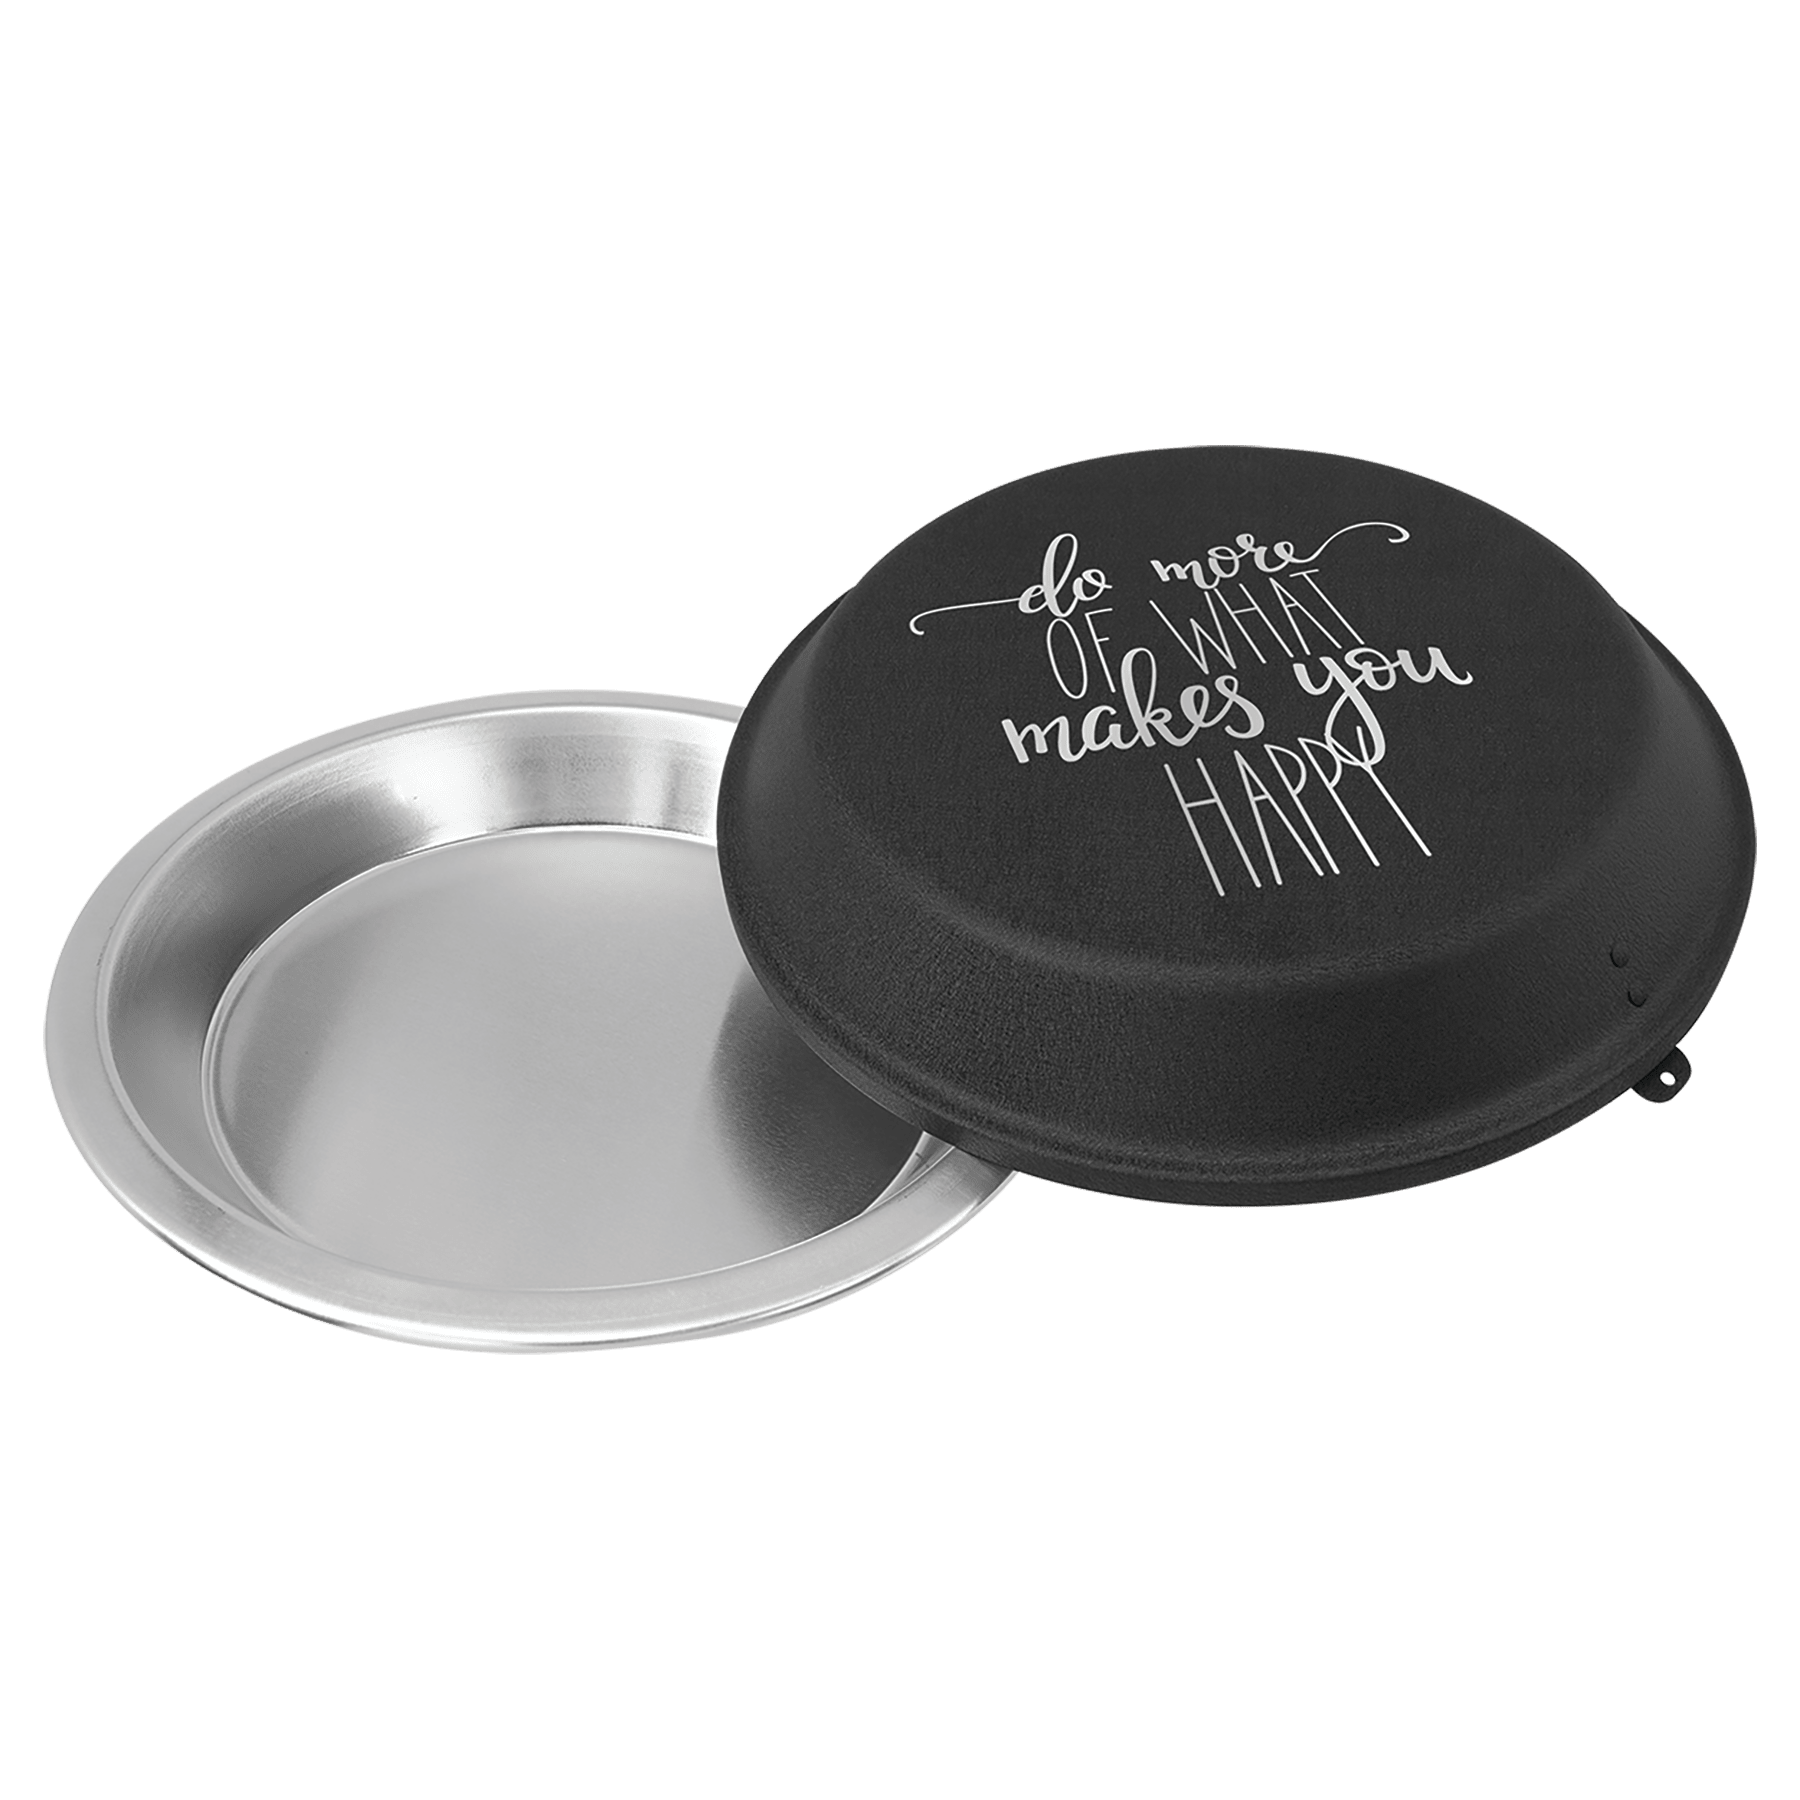 9 inch Pie pan with engraved lid